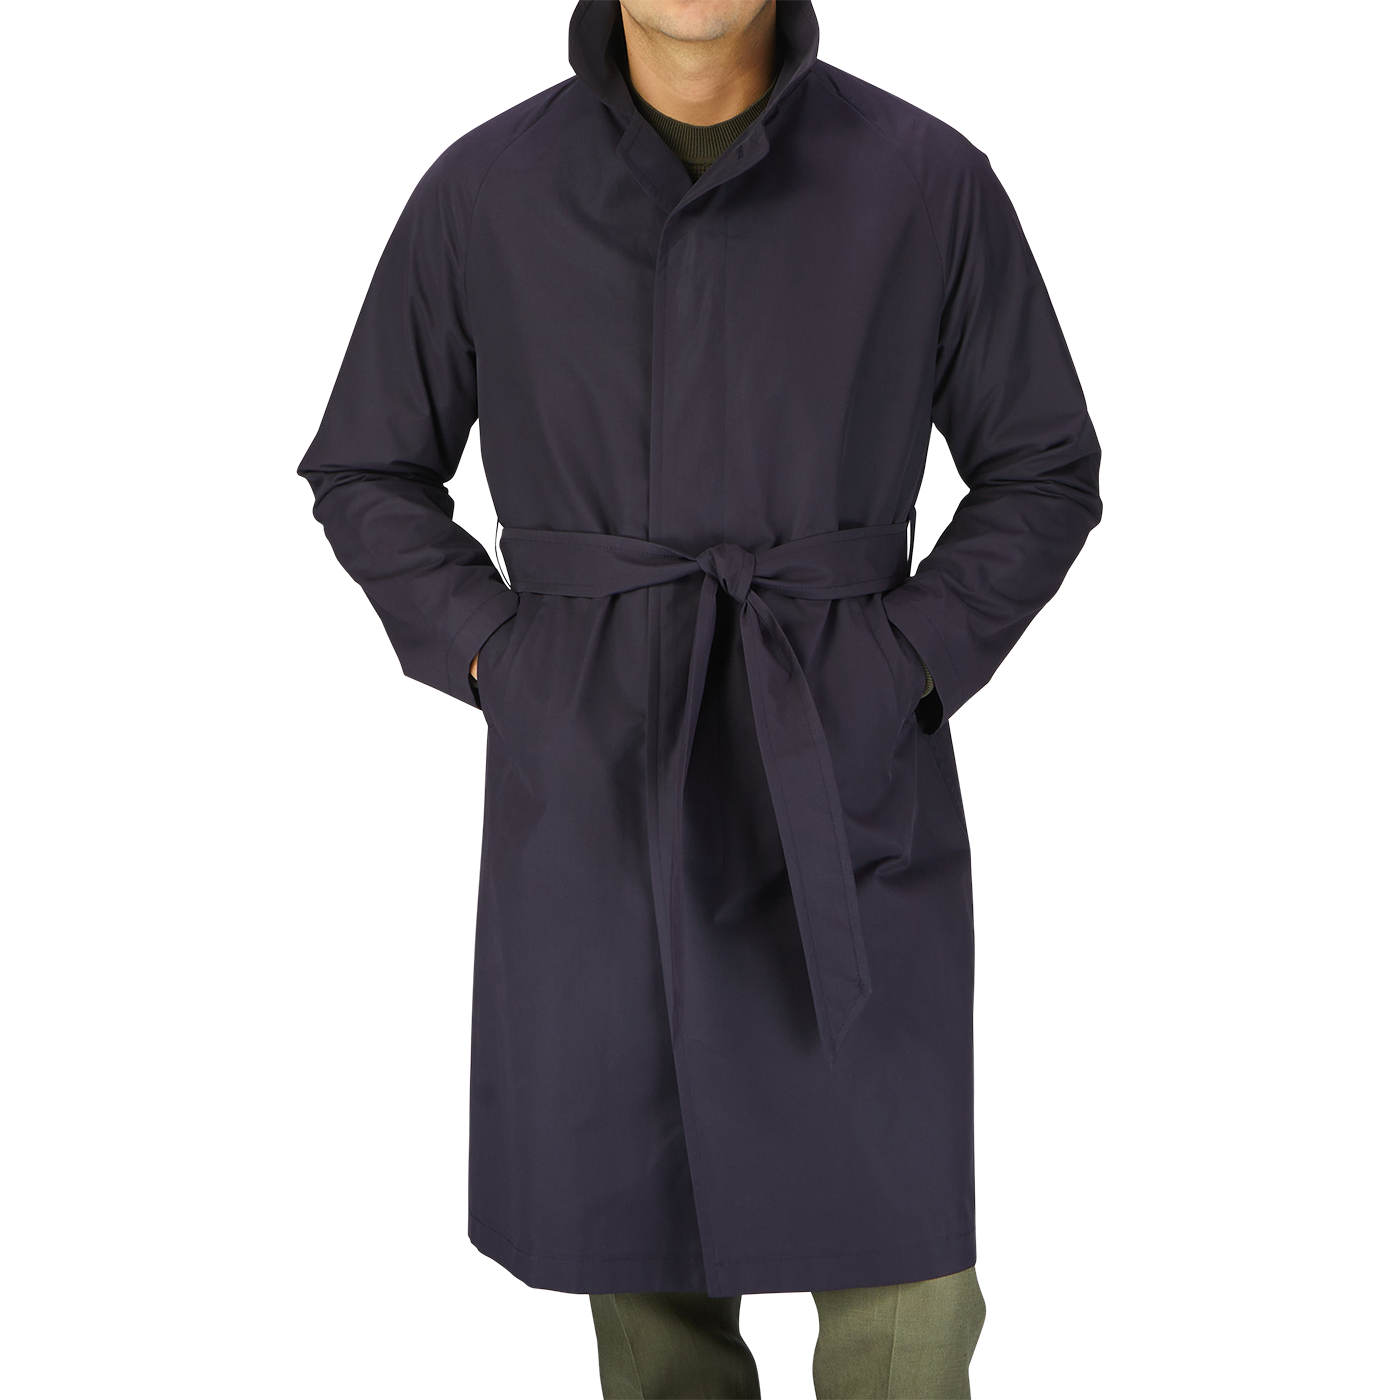 A man wearing a Tagliatore Navy Blue Cotton Nylon Trench Coat with a belt.